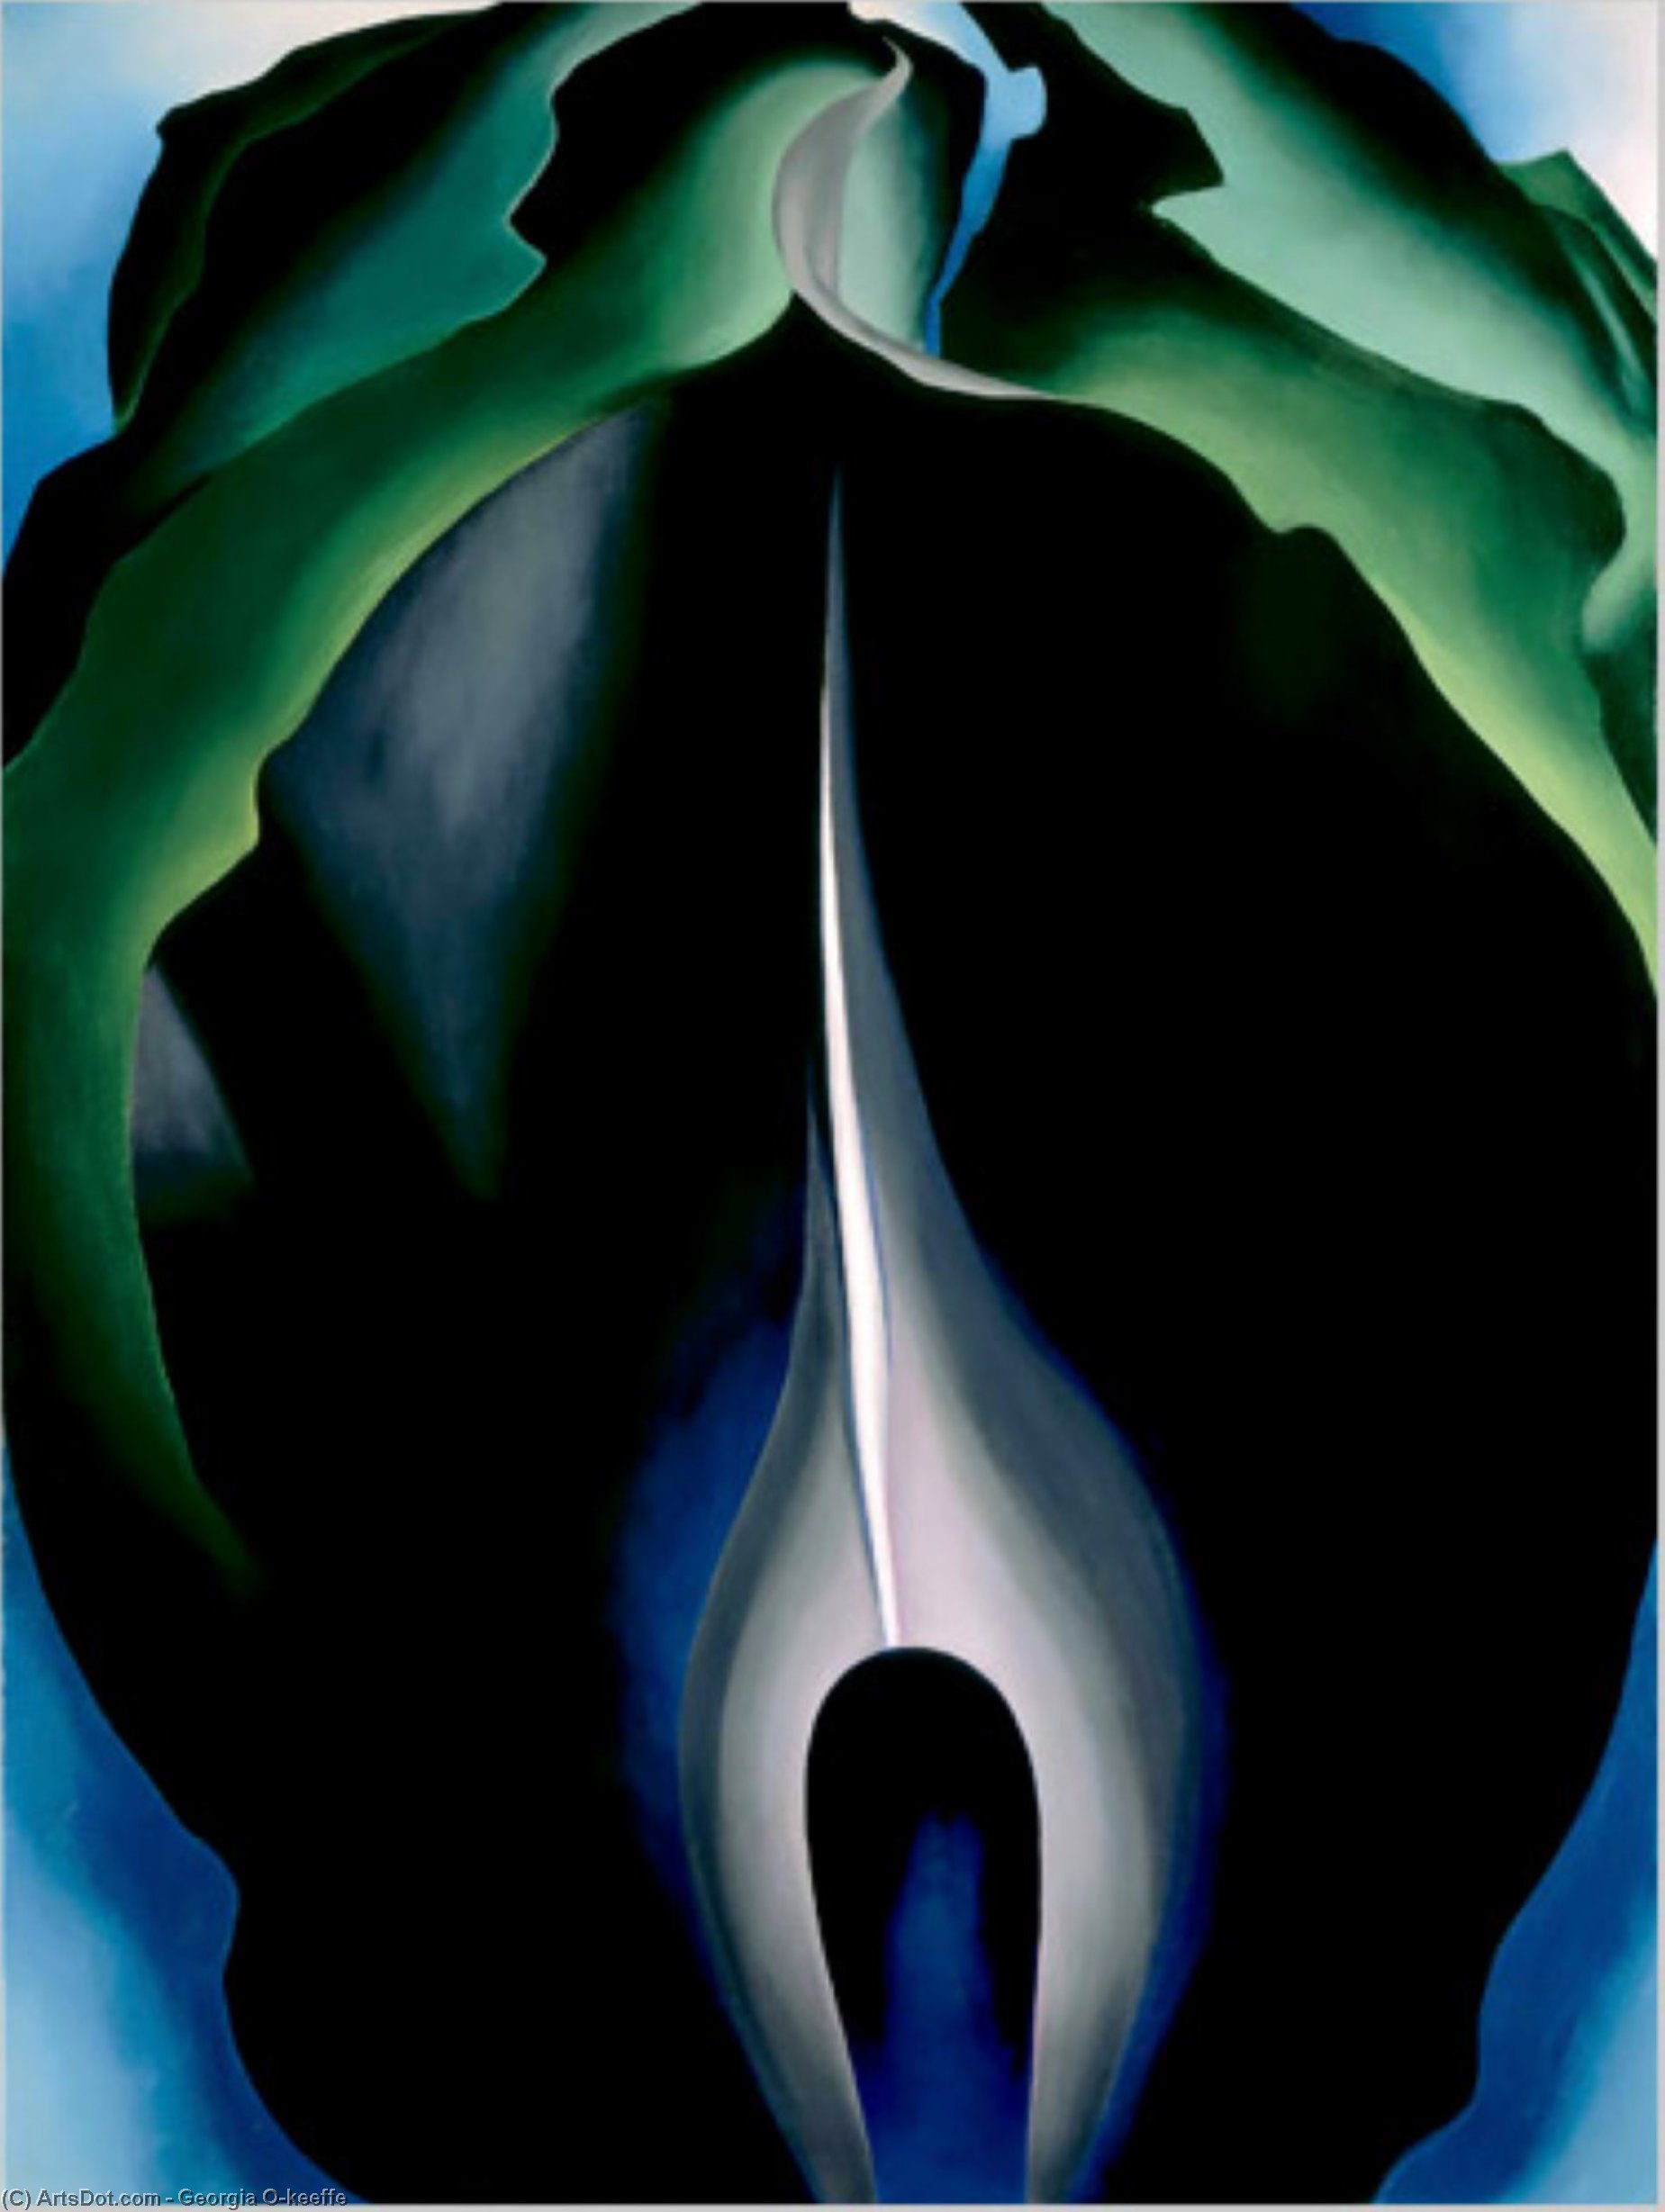 WikiOO.org - 백과 사전 - 회화, 삽화 Georgia Totto O'keeffe - Jack in the Pulpit No. IV